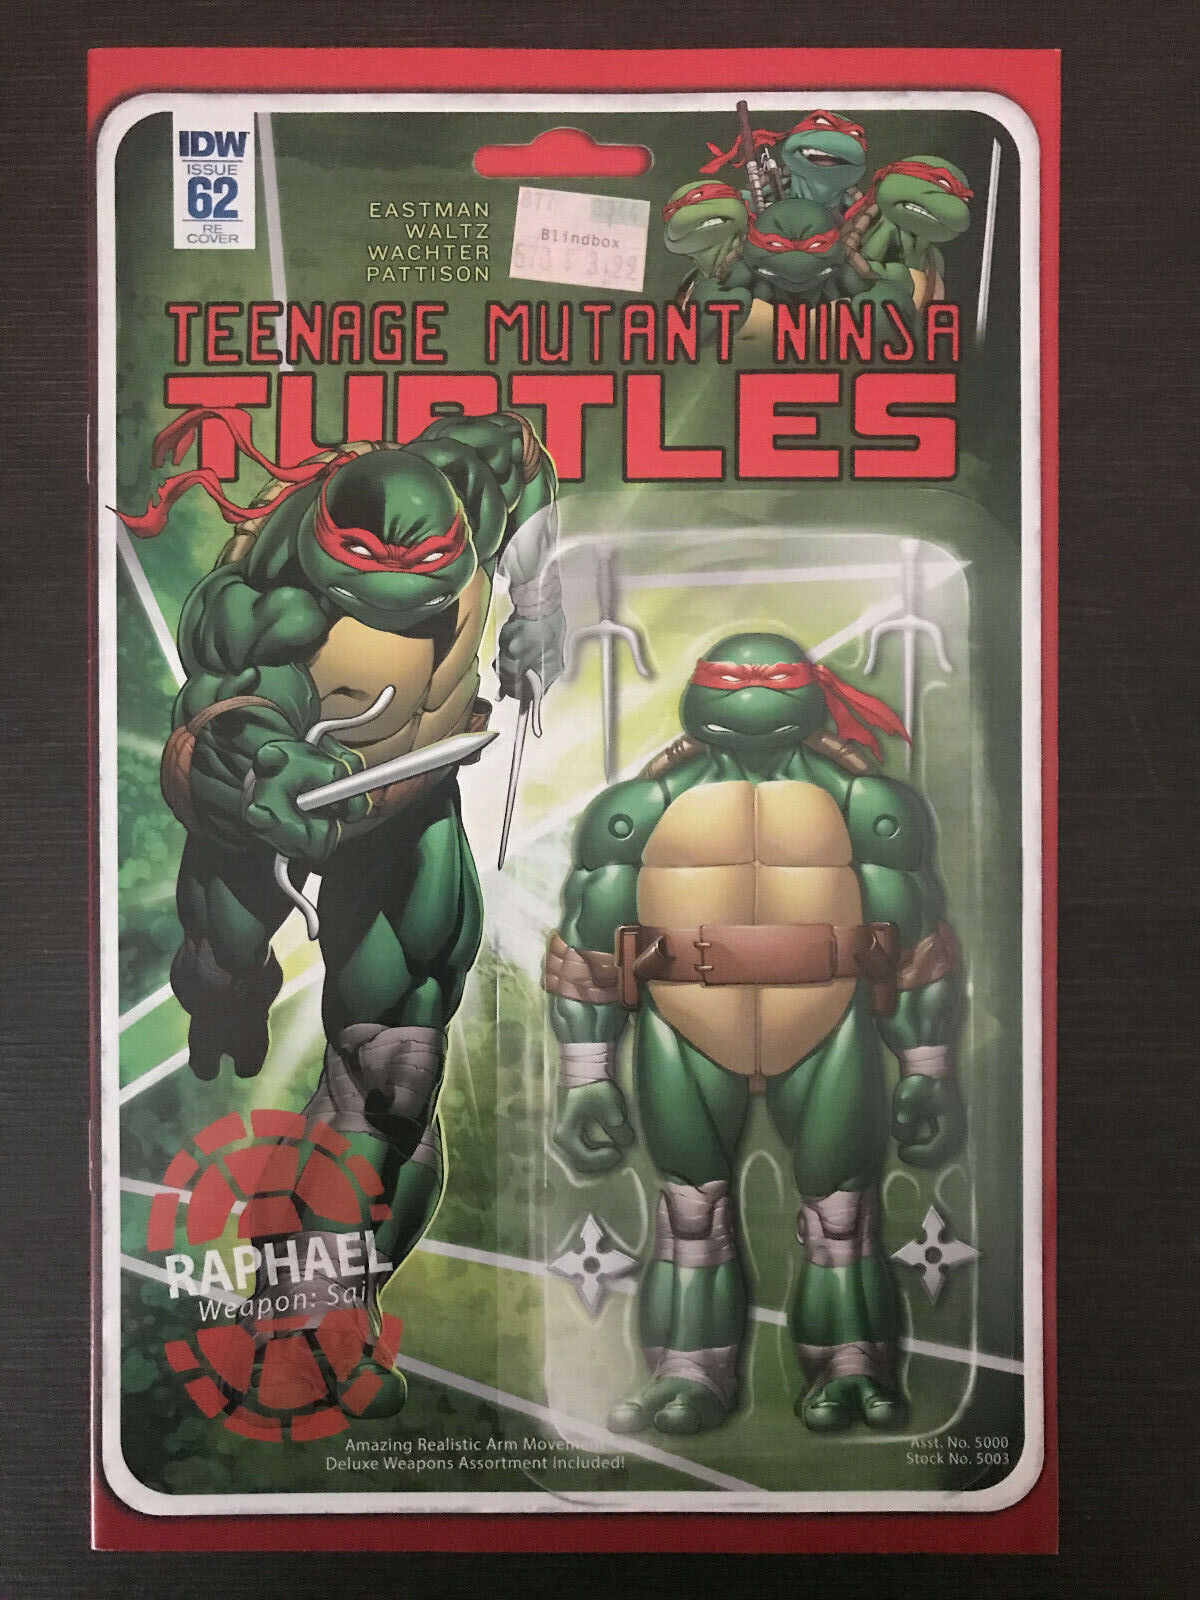 Teenage Mutant Ninja Turtles #62 Red 2016 Variant IDW Comic Book  Only 100 Made